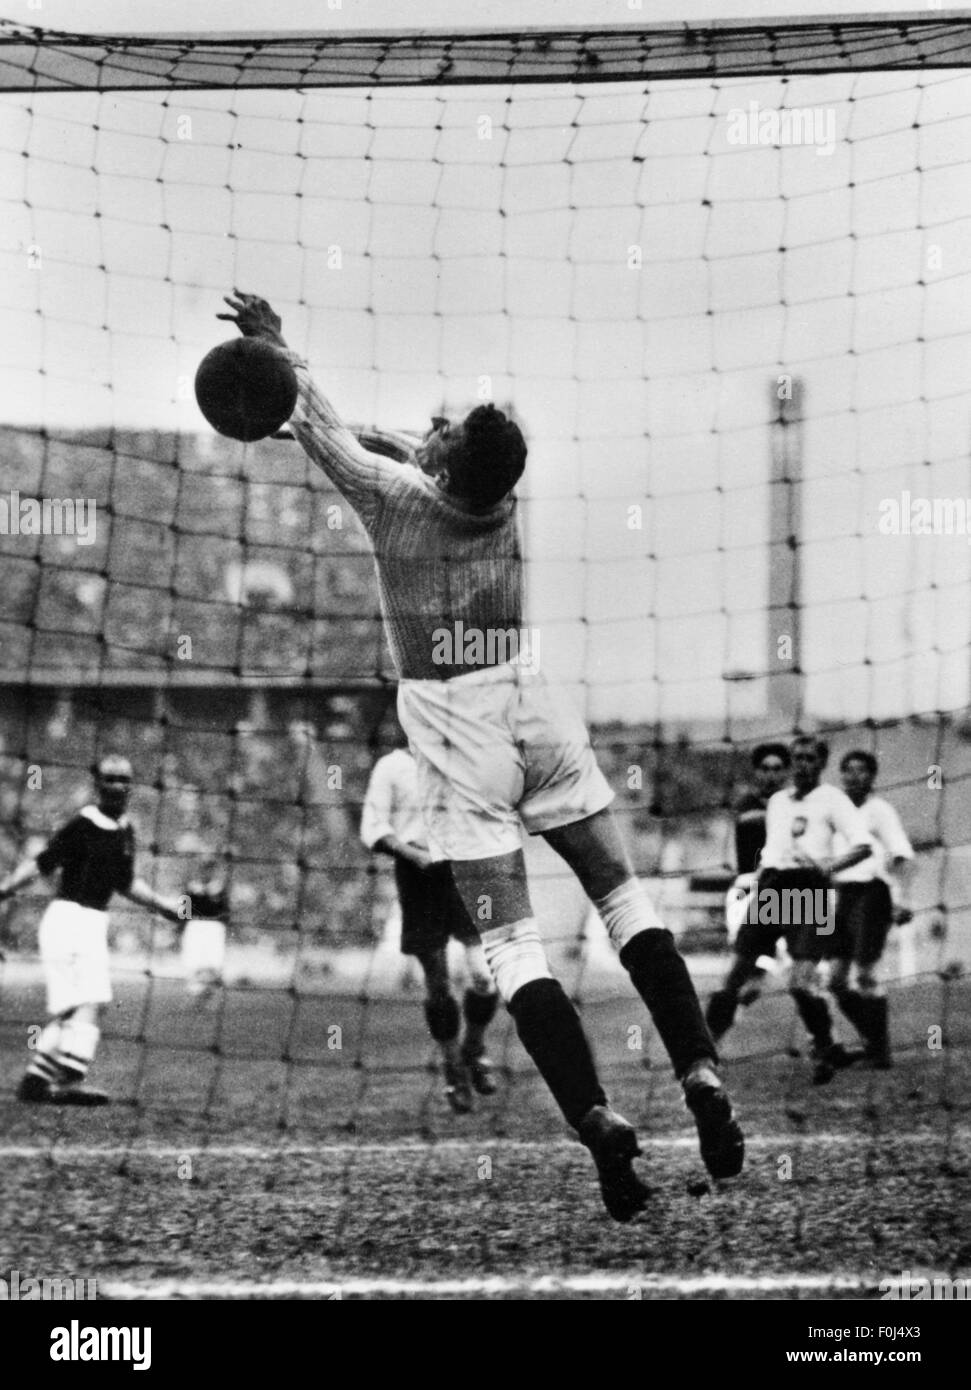 sports,Olympic Games,Berlin 1936,football tournament,match for the bronze medal,Norway versus Poland 3:2,Olympic stadium,13.8.1936,20th century,1930s,Germany,football,soccer,footballs,soccer balls,half length,football player,football players,shot on goal,shot on goals,shot,shots,shot at goal,goals,Olympia,Olympic Games,Olympics,Olympiad,championship,championships,contest,contests,competition,competitions,tournament,tourney,tournaments,tourneys,goal keeper,goalkeeper,netminder,goalie,goal keepers,goalkeepers,netminders,Additional-Rights-Clearences-Not Available Stock Photo